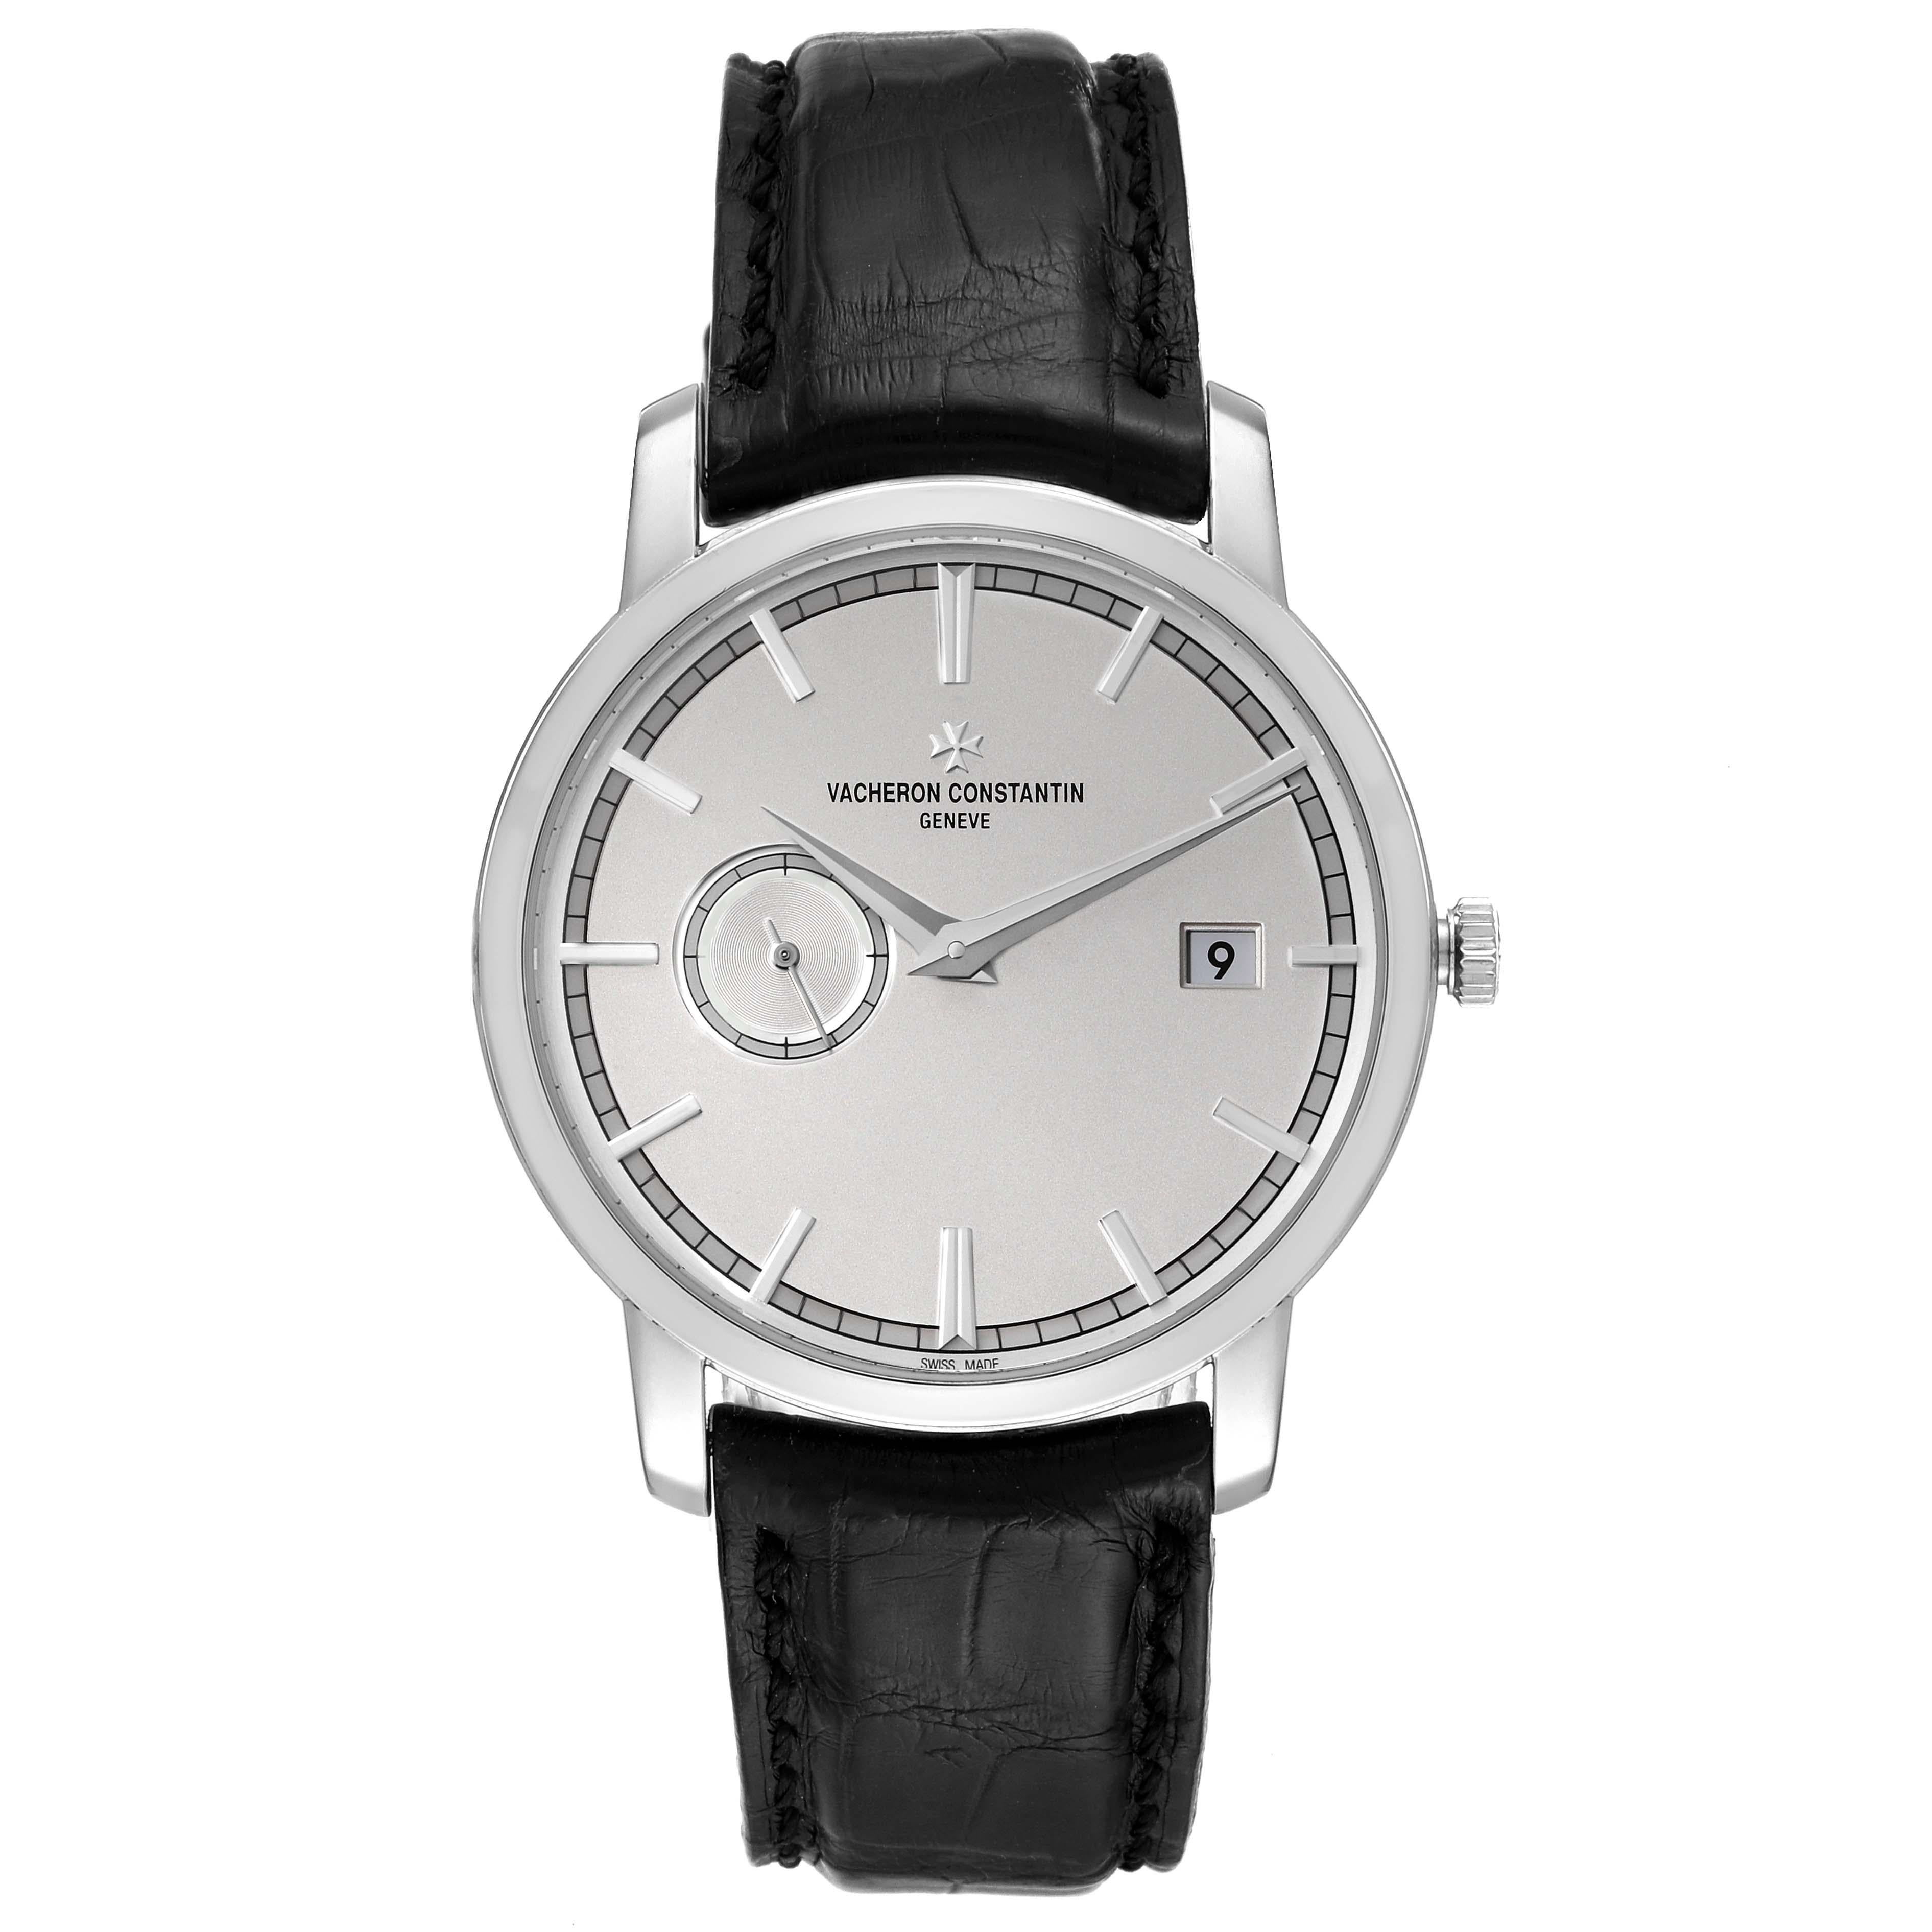 Vacheron Constantin Traditionnelle White Gold Mens Watch 87172 Box Papers. Automatic self-winding movement. 18K white gold case 38.0 mm in diameter. Transparent exhibition sapphire crystal caseback. 18K white gold bezel. Scratch resistant sapphire